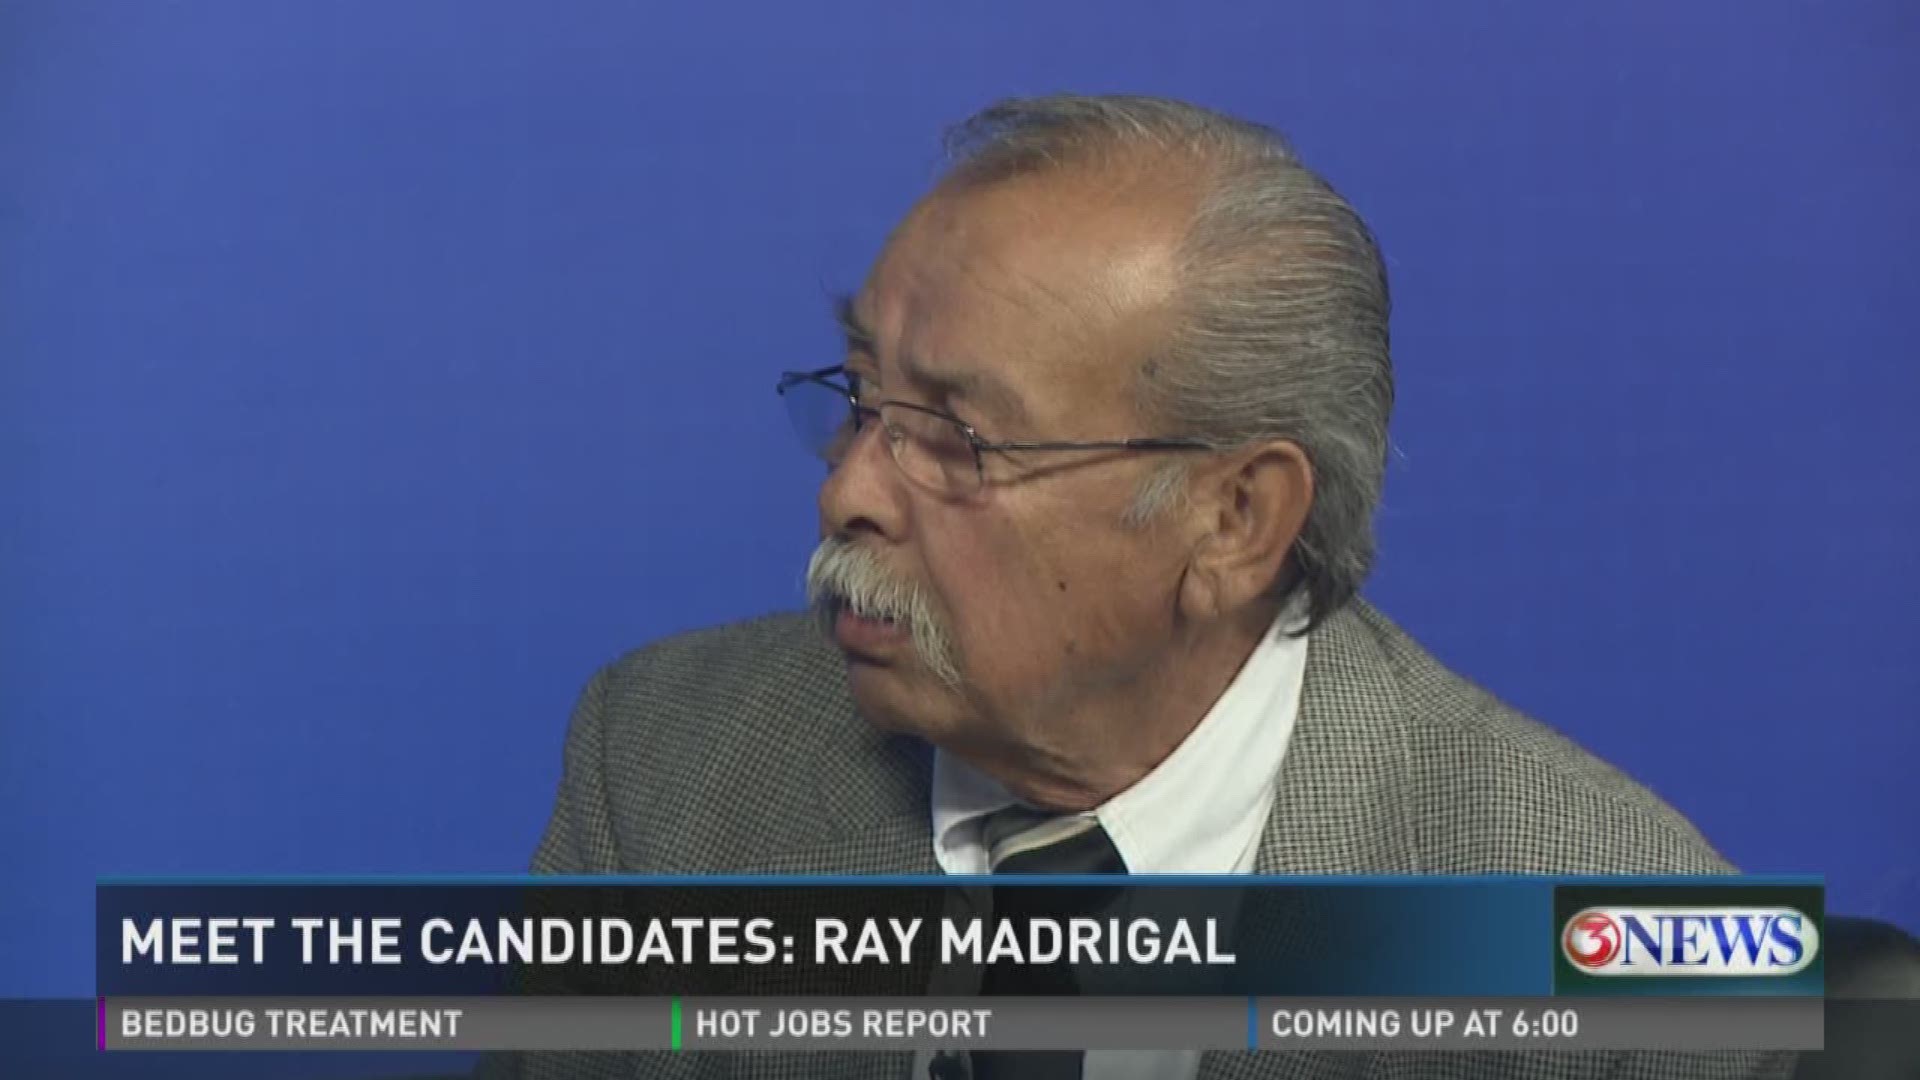 Mayoral candidate Ray Madrigal visited 3News Tuesday, April 11, to discuss the upcoming election and his goals for the City of Corpus Christi.